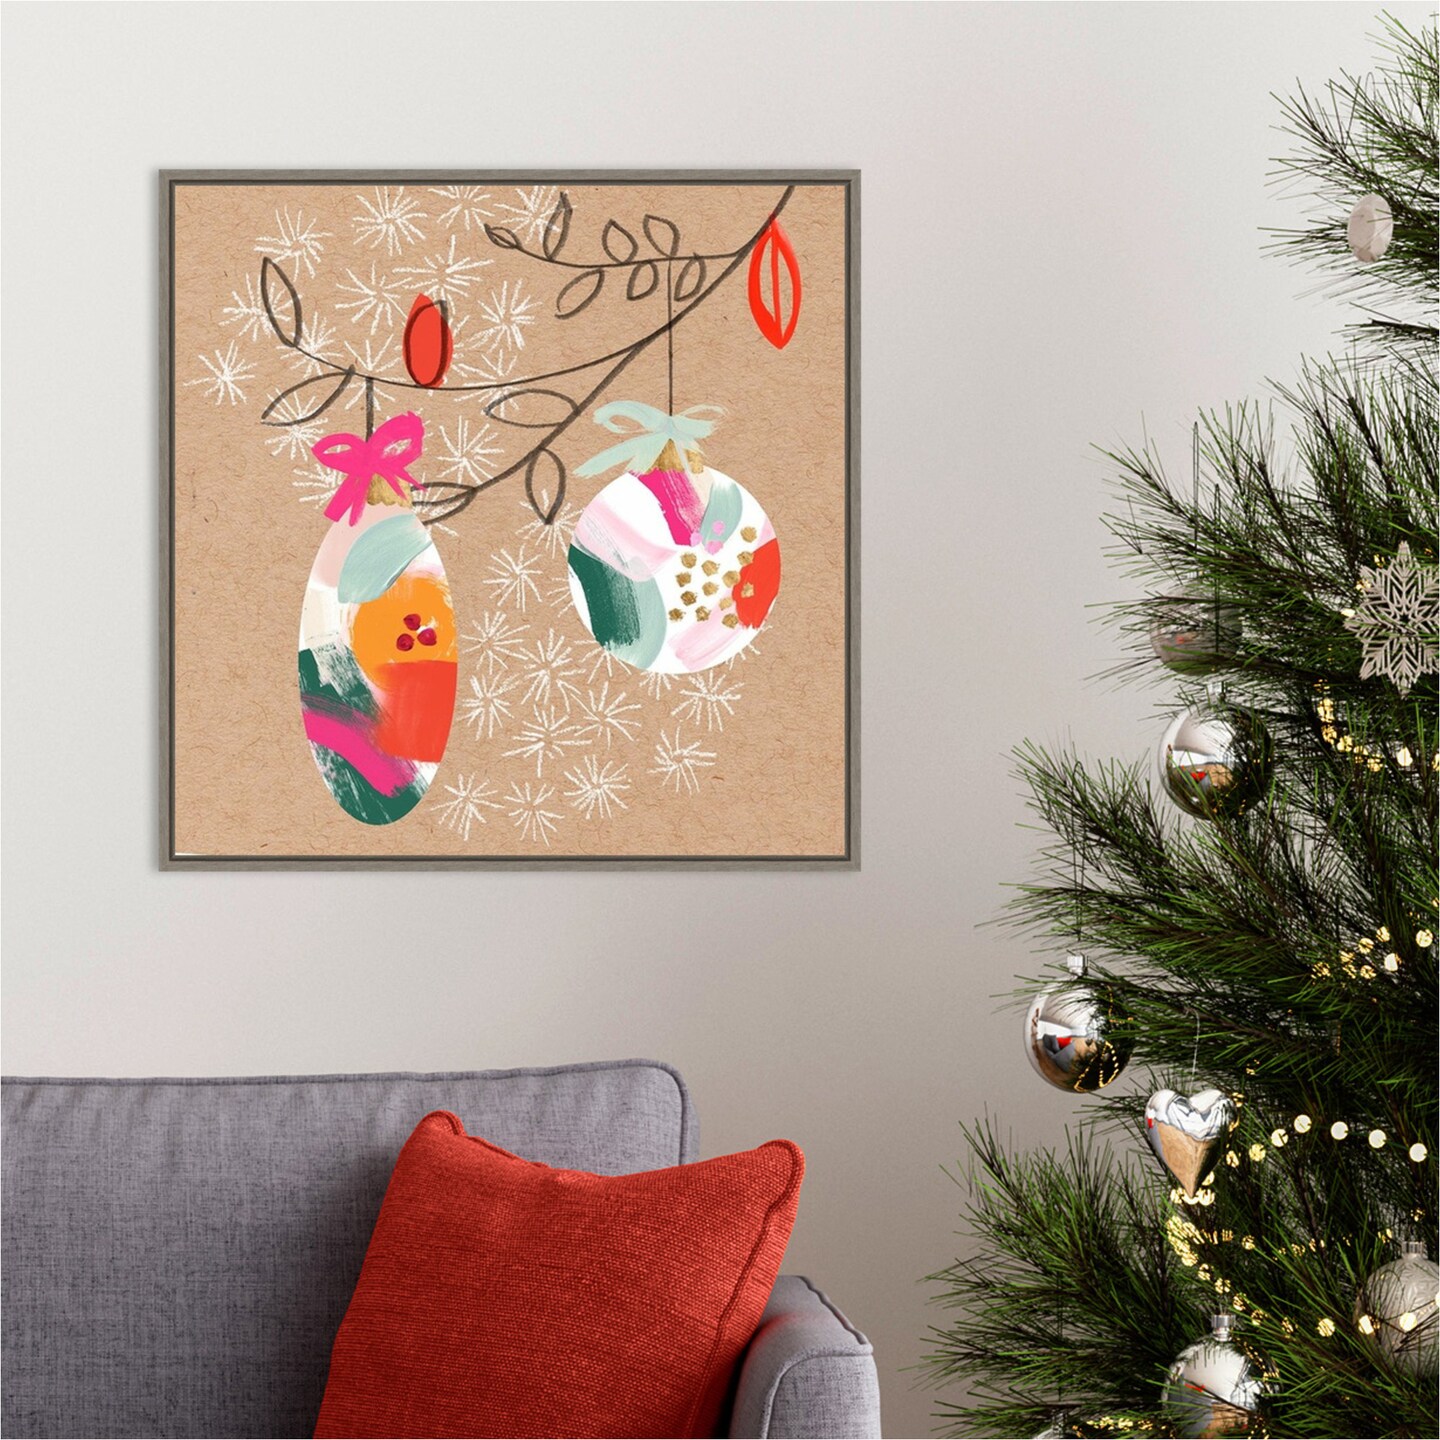 Crafty Christmas IV by Jennifer Paxton Parker 22-in. W x 22-in. H. Canvas Wall Art Print Framed in Grey